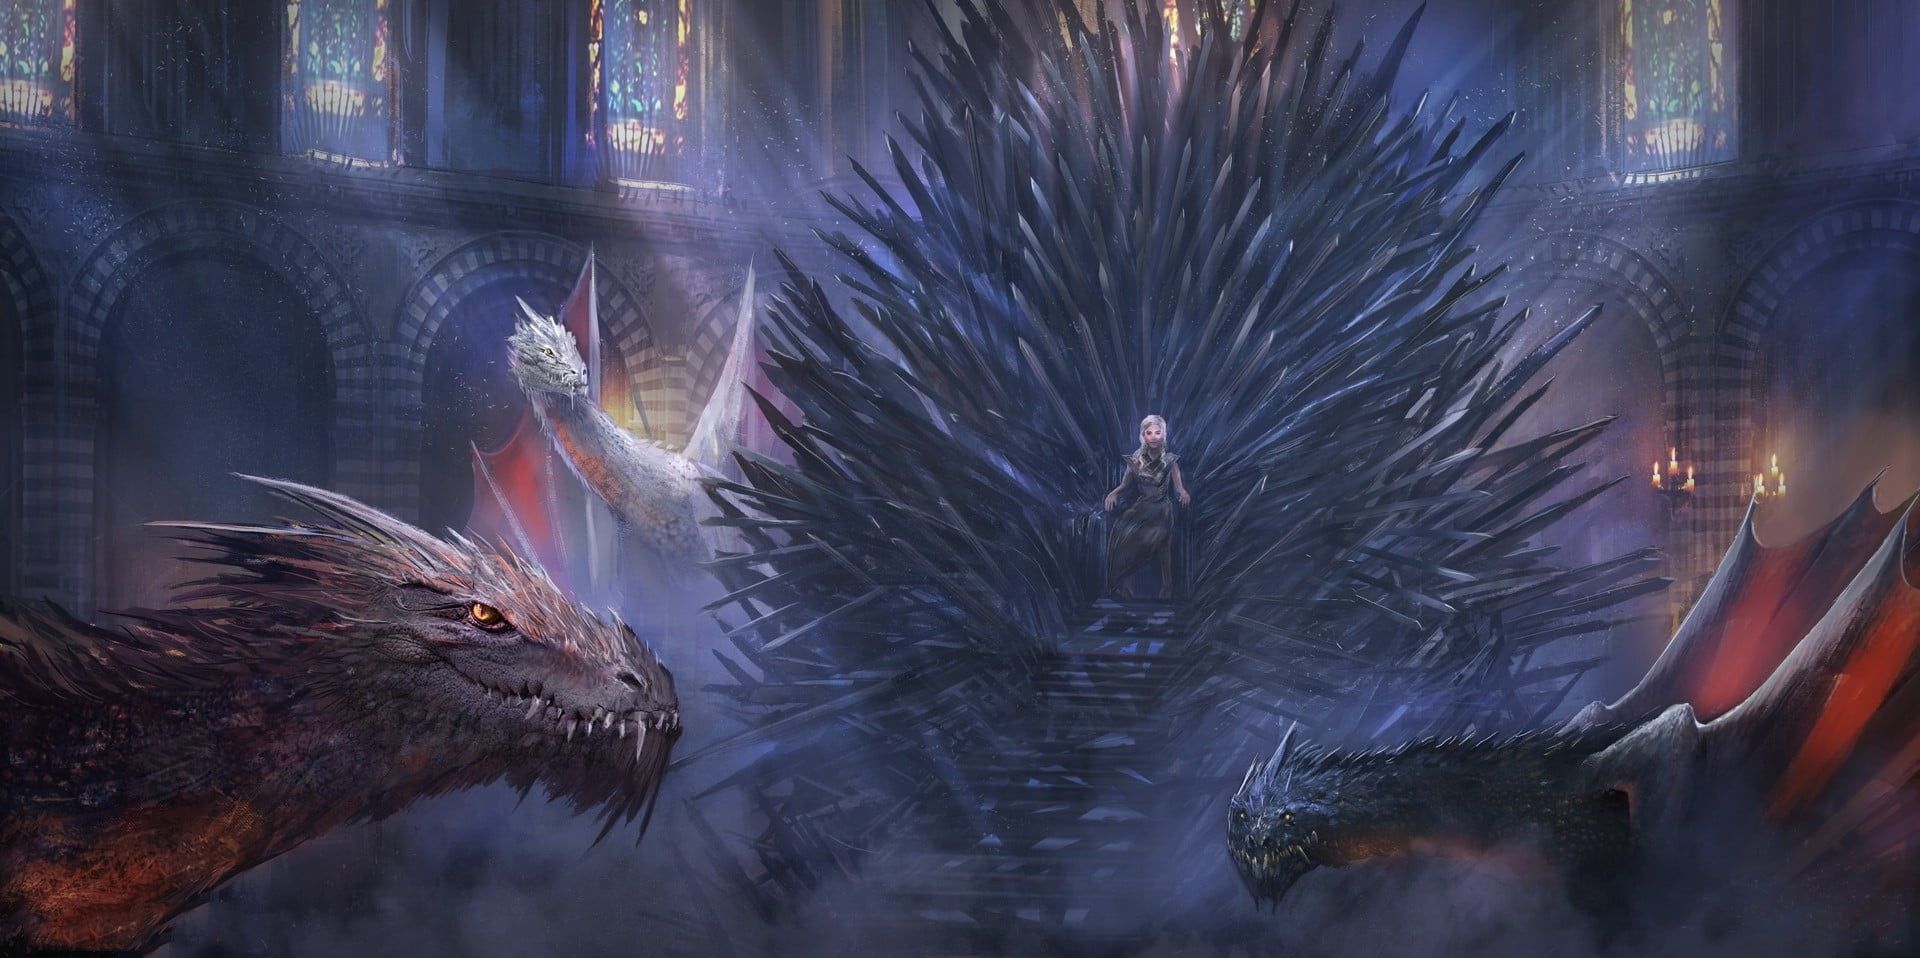 Daenerys Targaryen Queen Of The Ashes In The Iron Throne Wallpapers